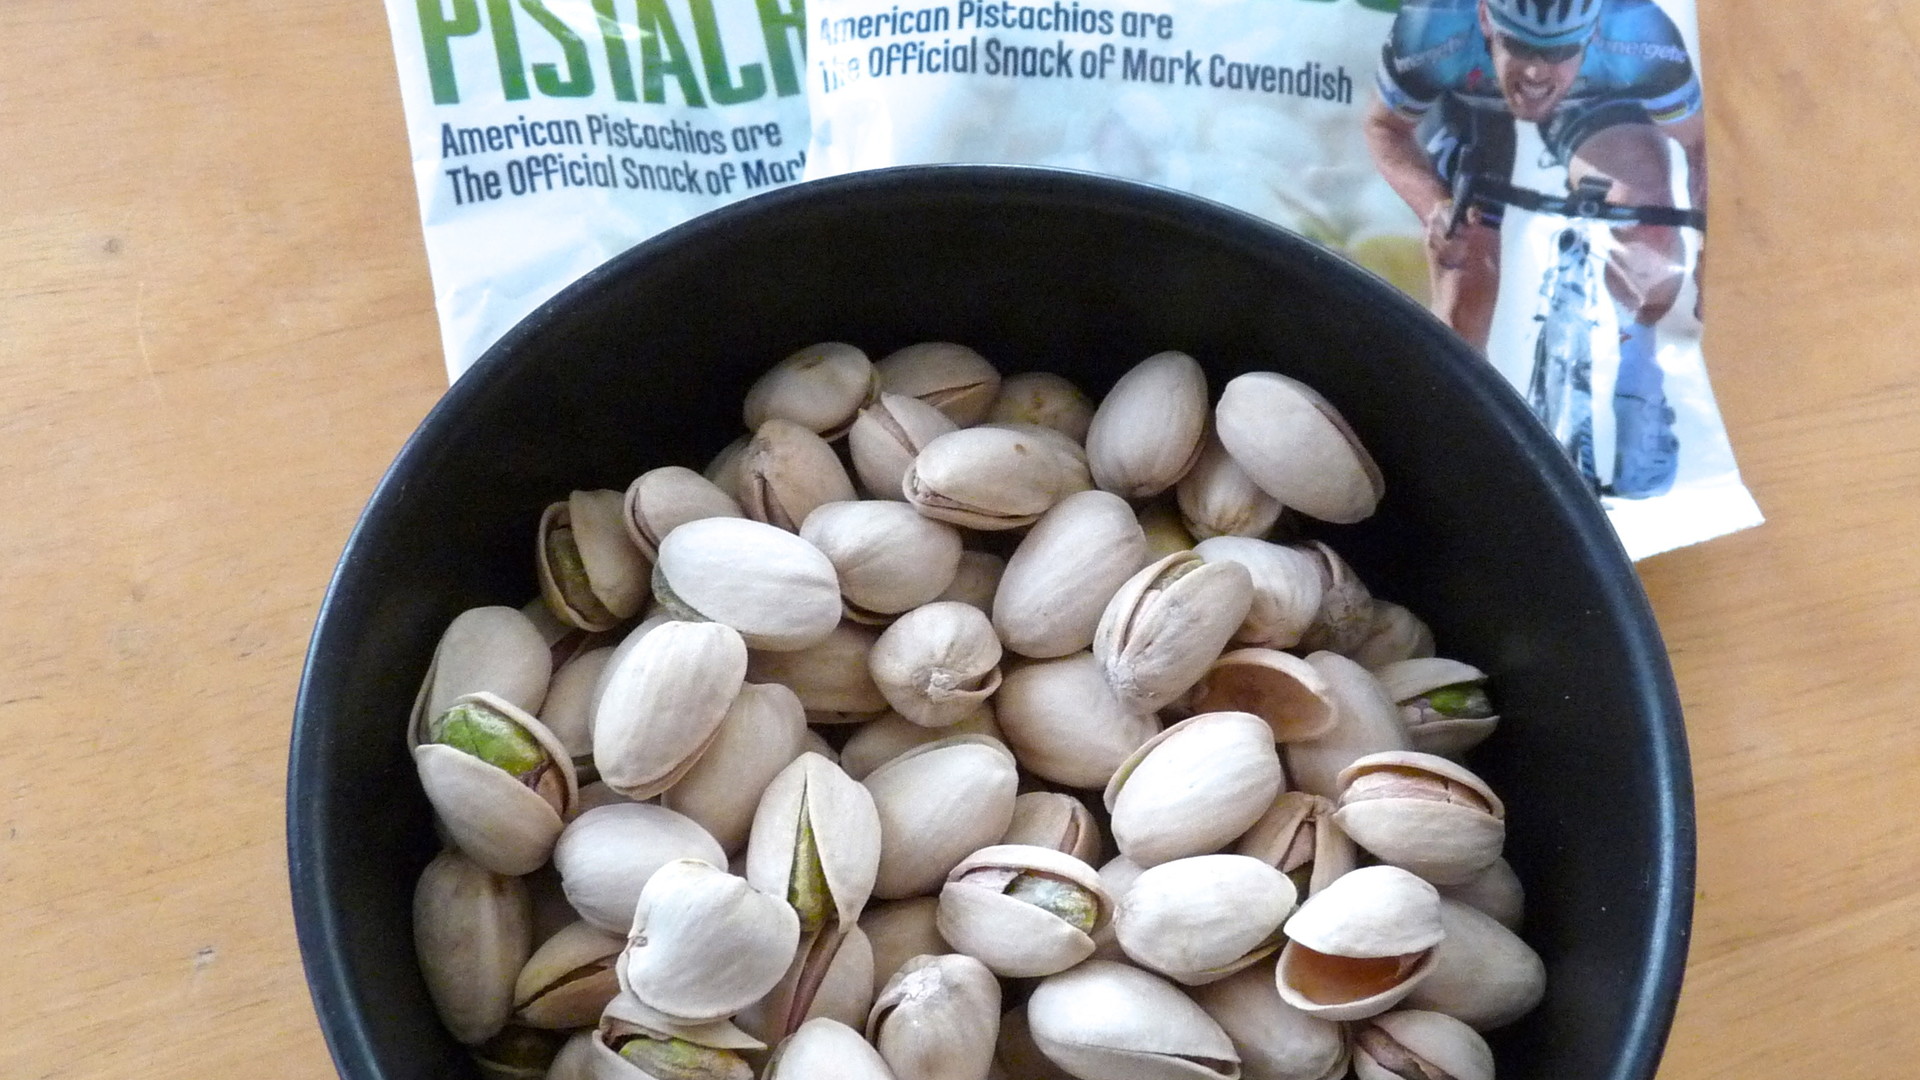 Pistachios Have Complete Protein